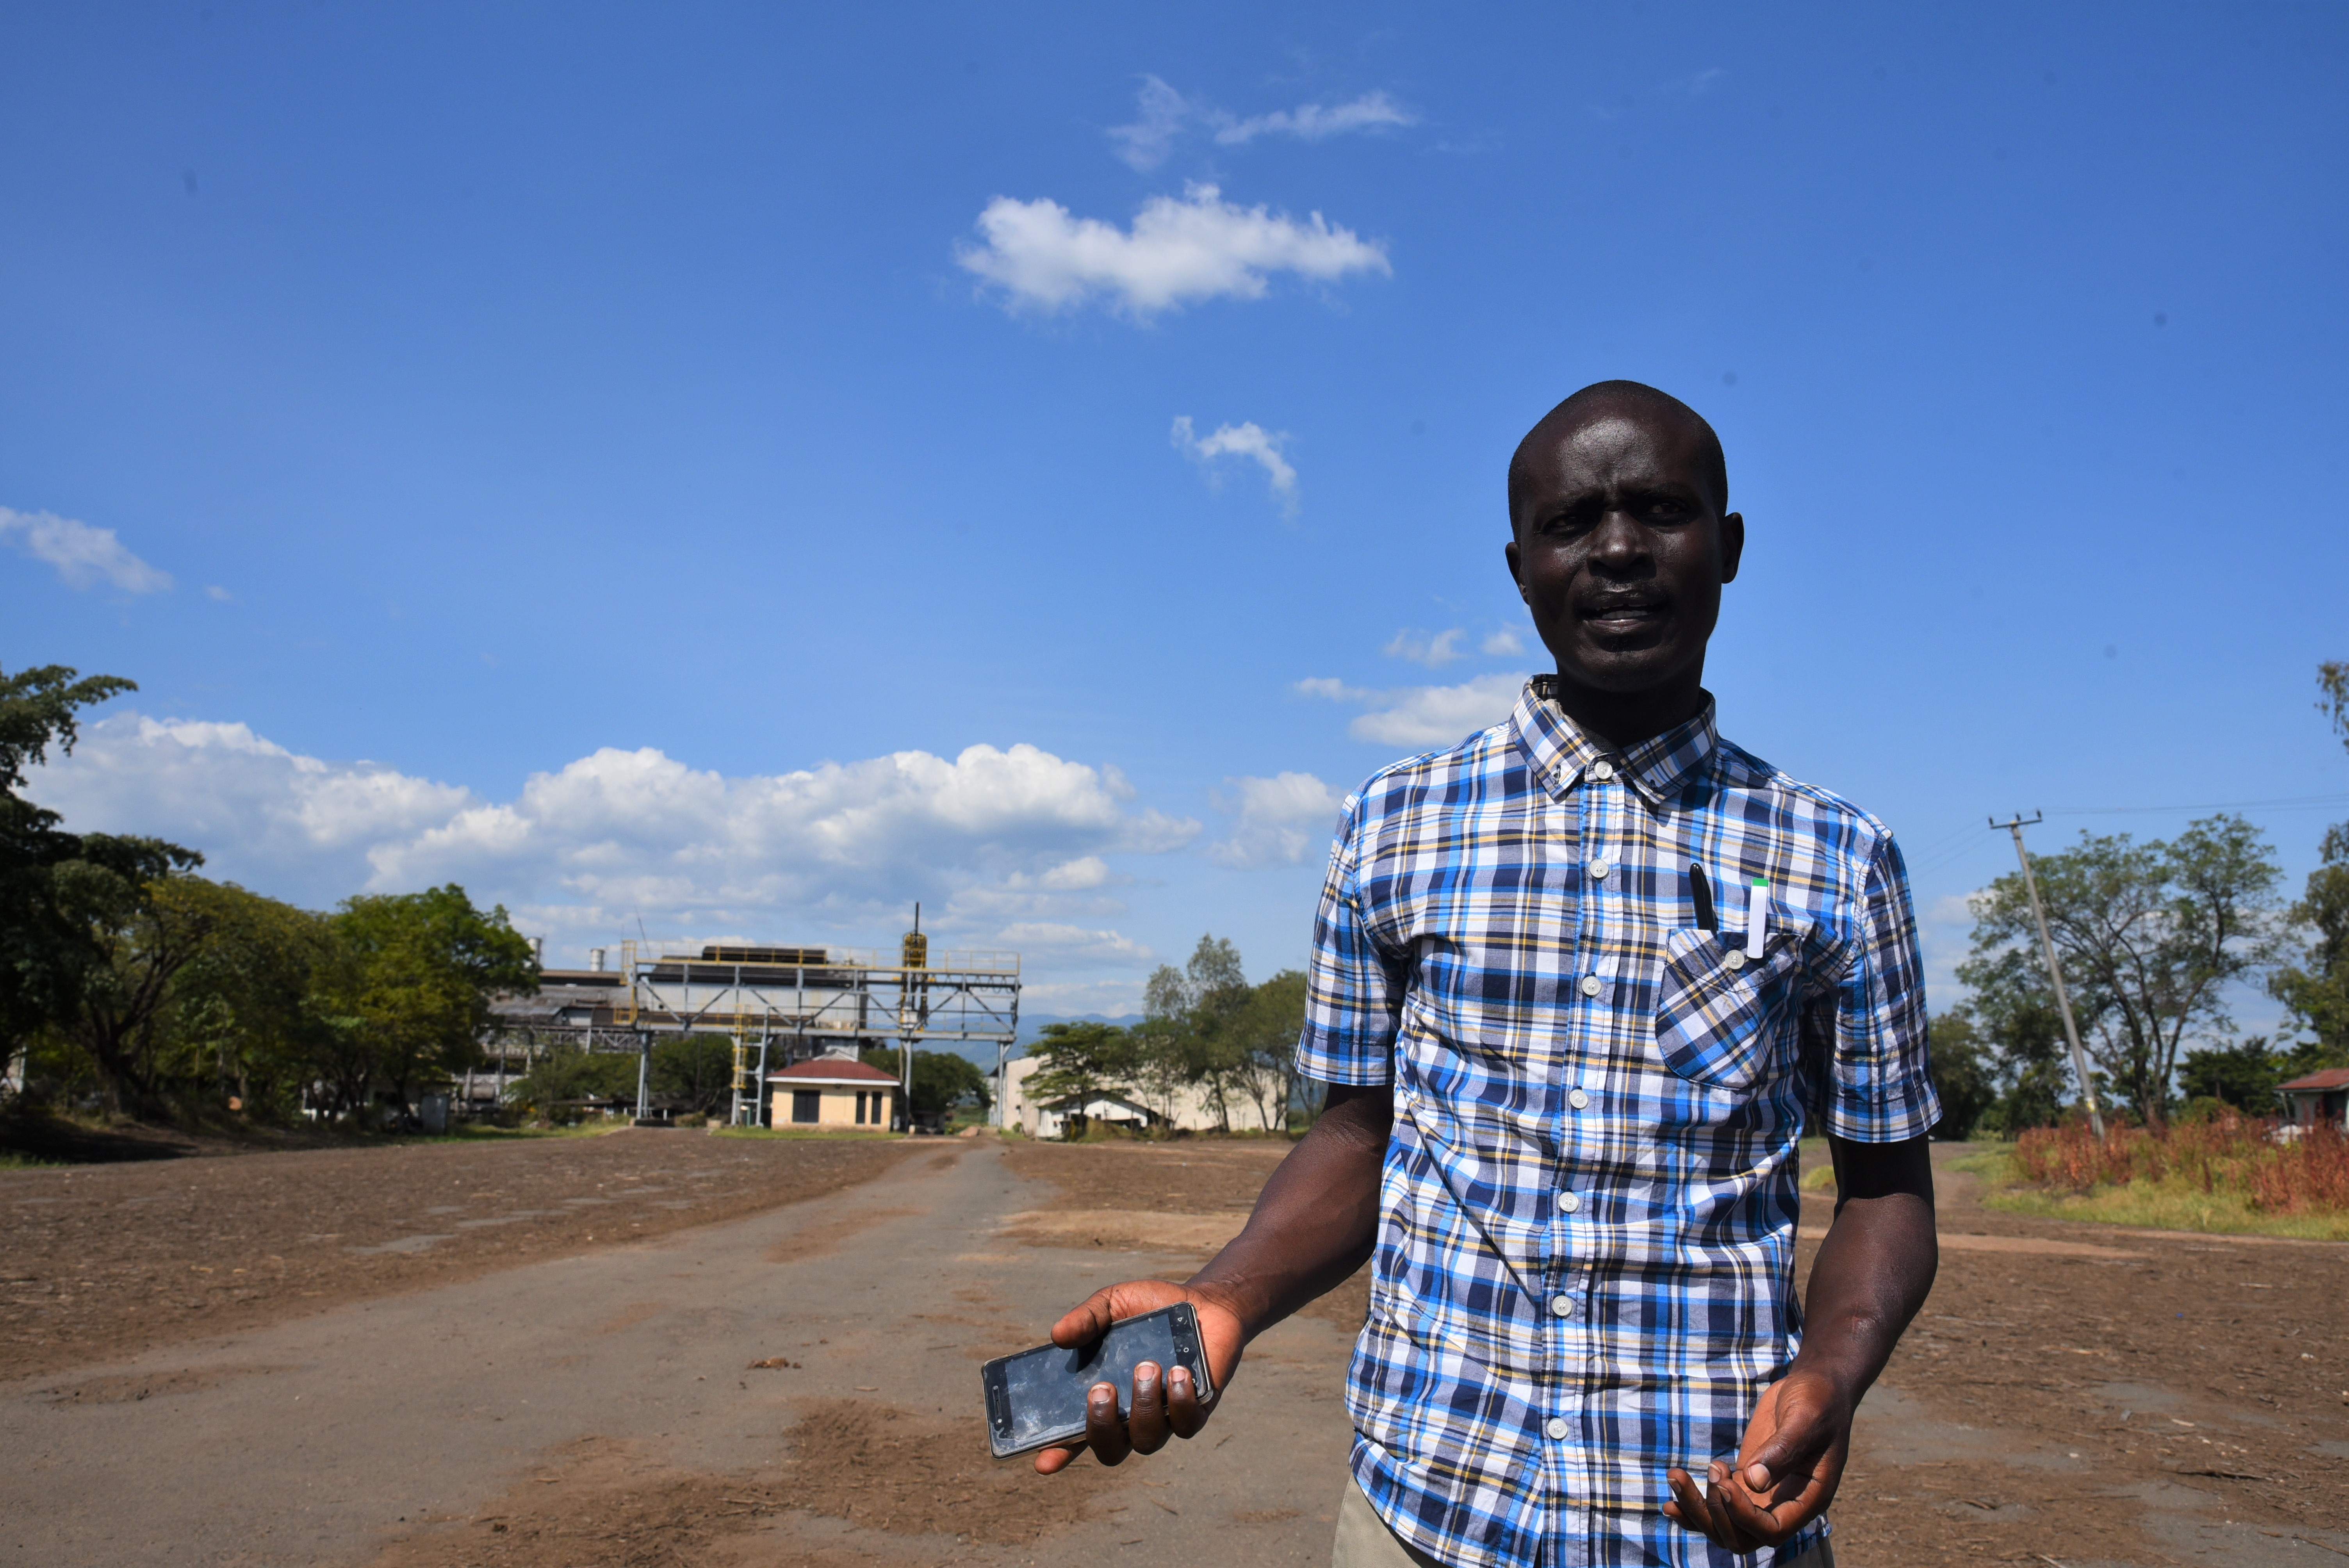 Oscar Ochieng, 35, explaining the region's conflict dynamics in front of a near-derelict sugar mill - one of the drivers of crime and stock theft. Photo: UN Women/Luke Horswell